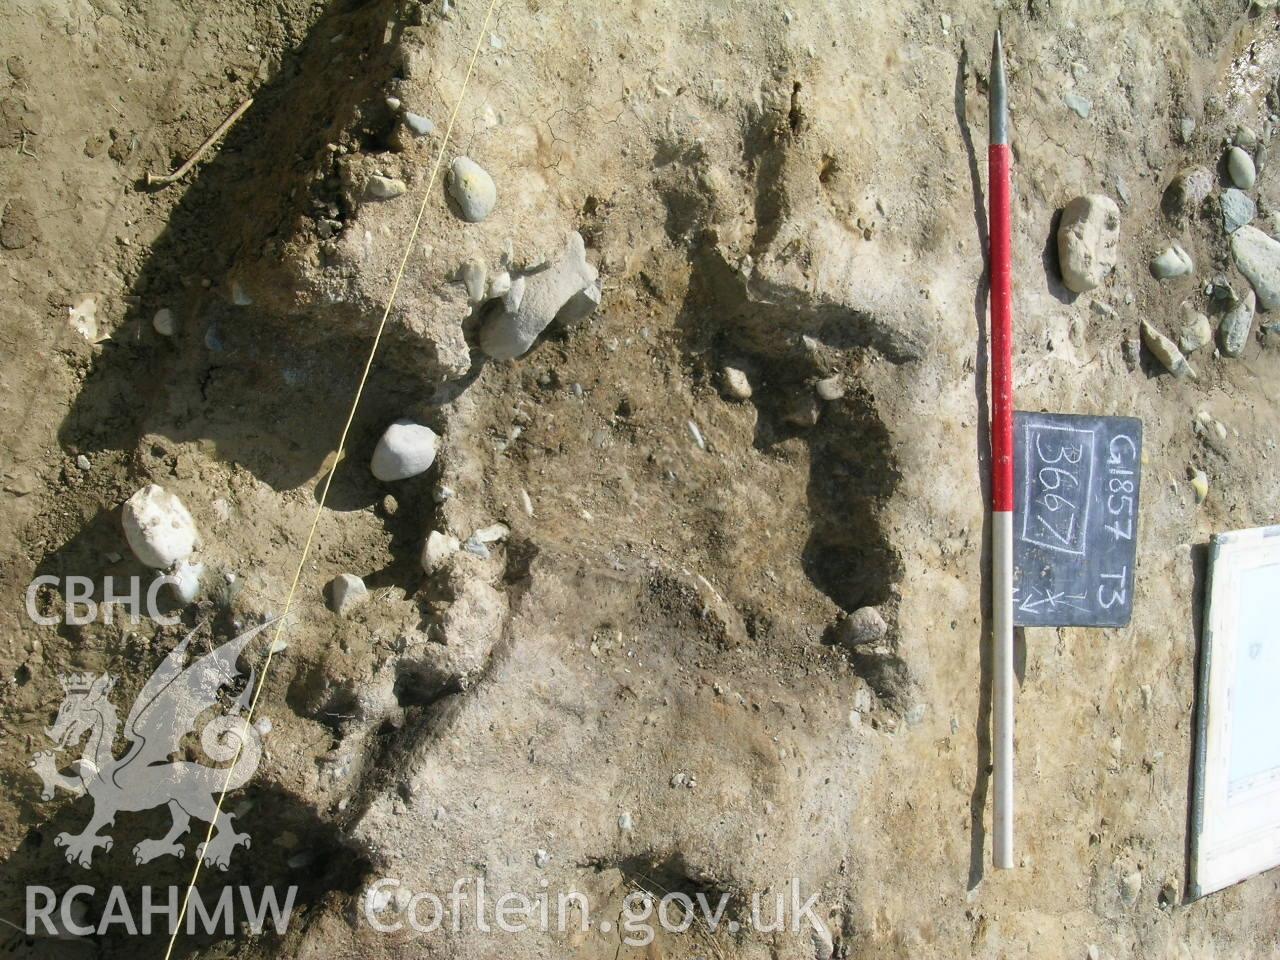 Digital photograph from excavation of Parc Bryn Cegin, Llandygai, by Gwynedd Archaeological Trust. [3667] after stone removed - post exc., from NNE (numbers refer to context records). Scale 1x1m.